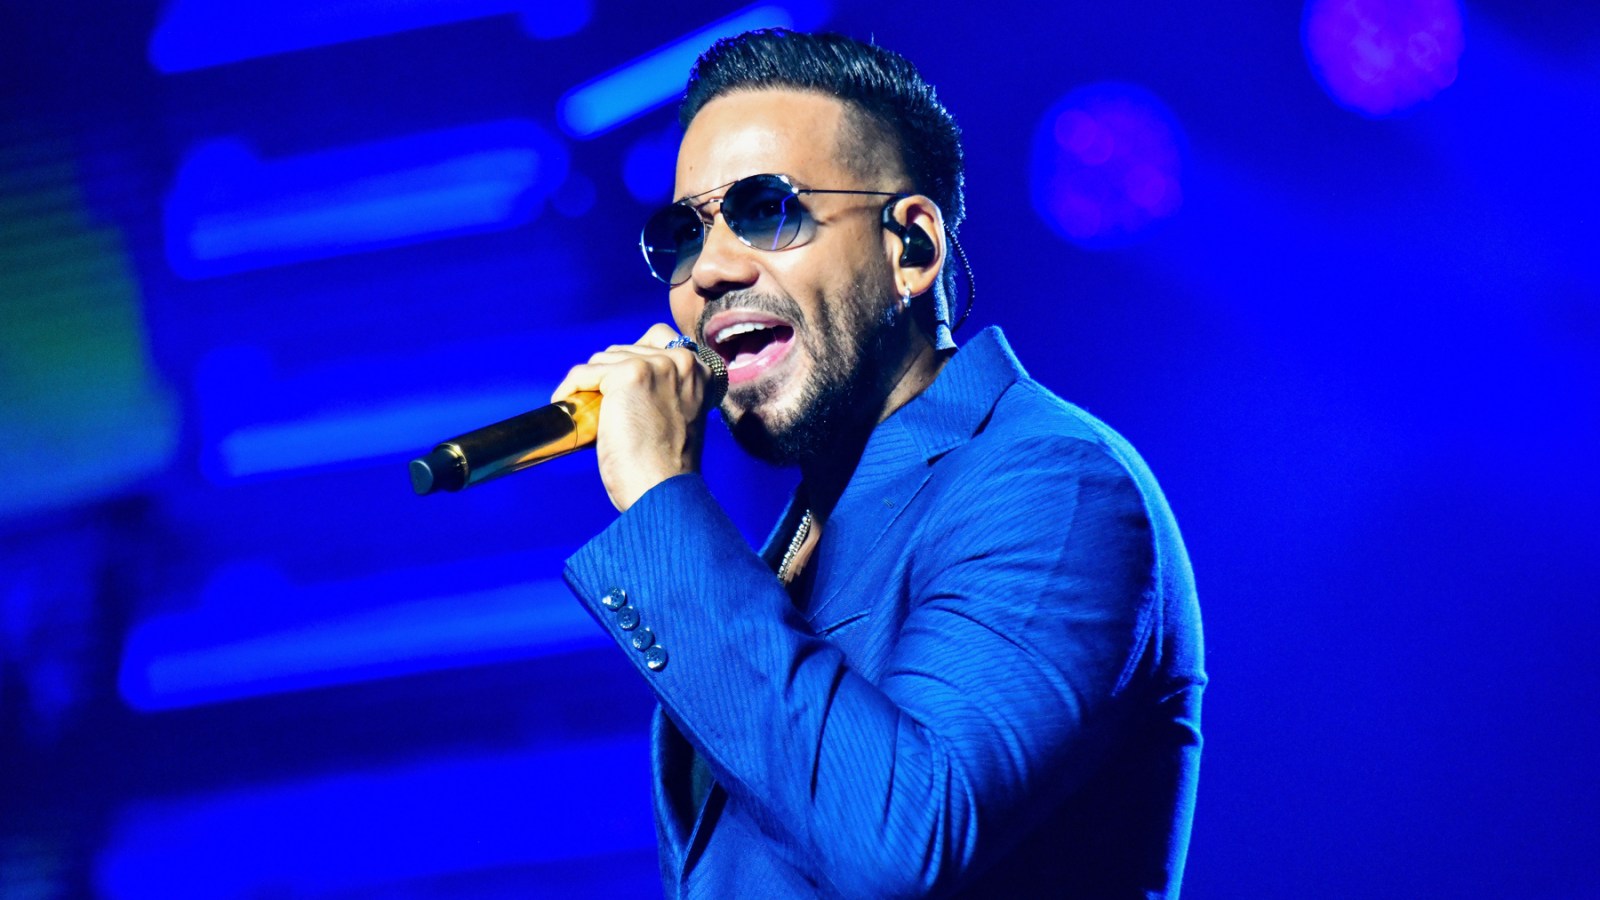 Romeo Santos Denies Reports He Was Hospitalized After Suffering a Heart Attack